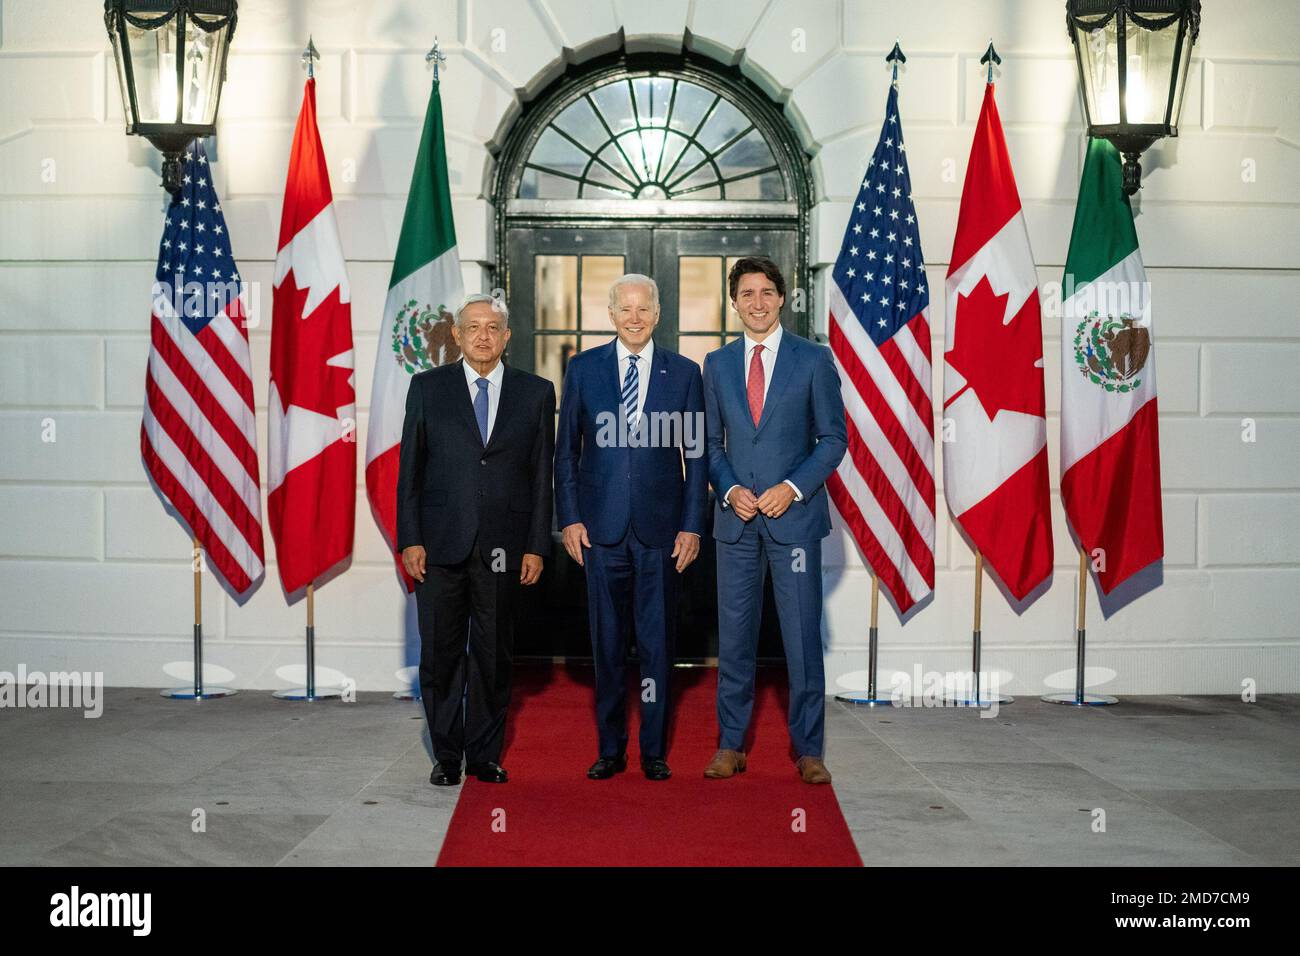 Reportage: President Joe Biden greets Canadian Prime Minster Justin Trudeau and Mexico President Andrés Manuel López Obrador, Thursday, November 18, 2021, at the South Portico of the White House Stock Photo